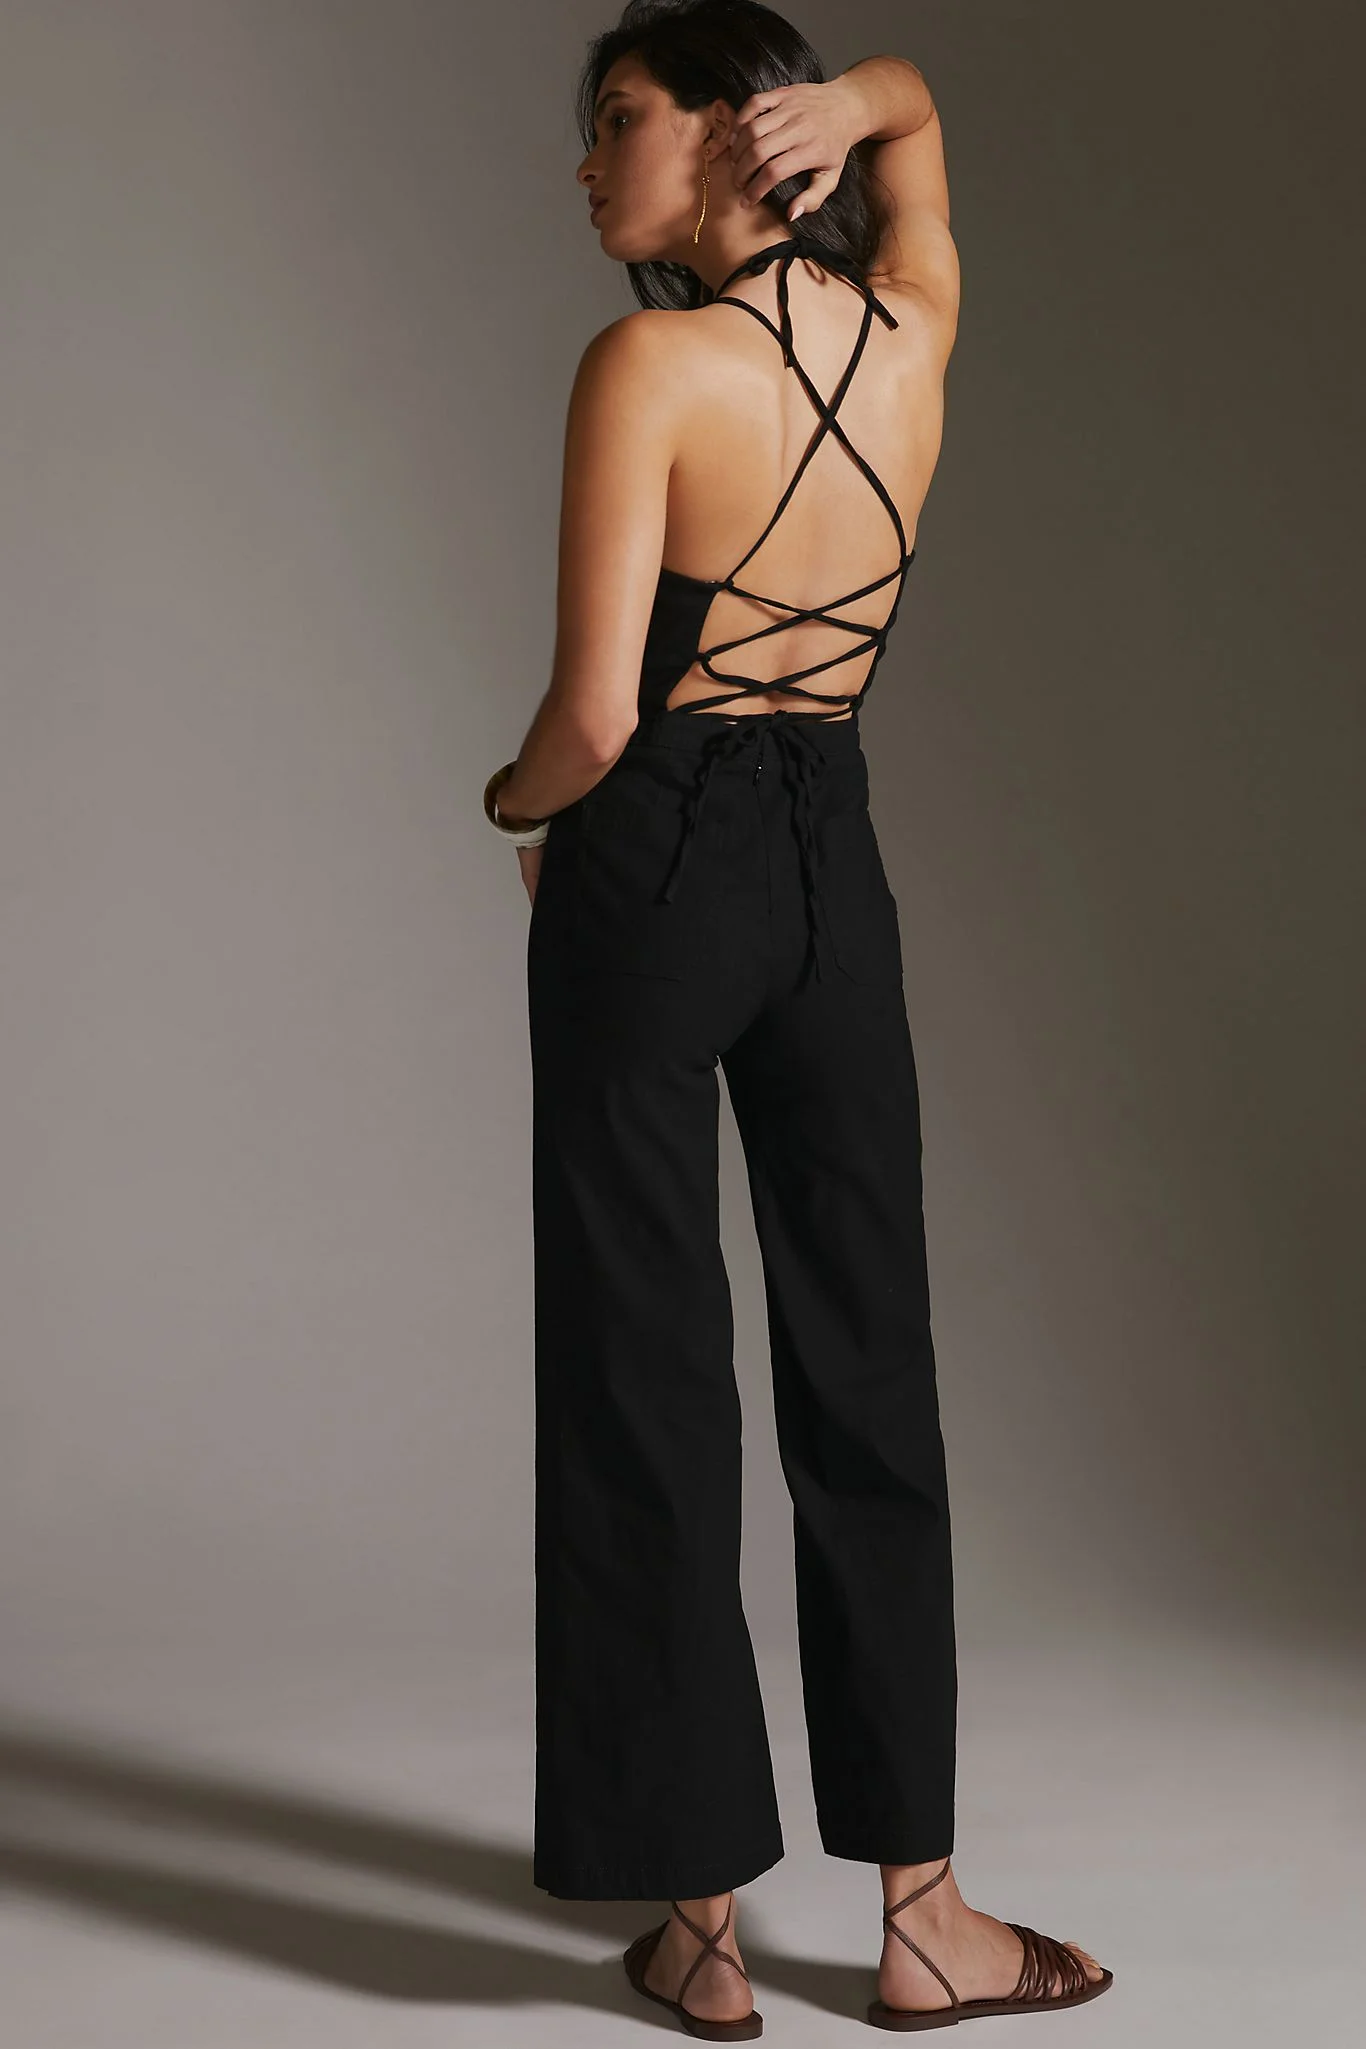 Strappy Back Contrast Mesh Sports Jumpsuit